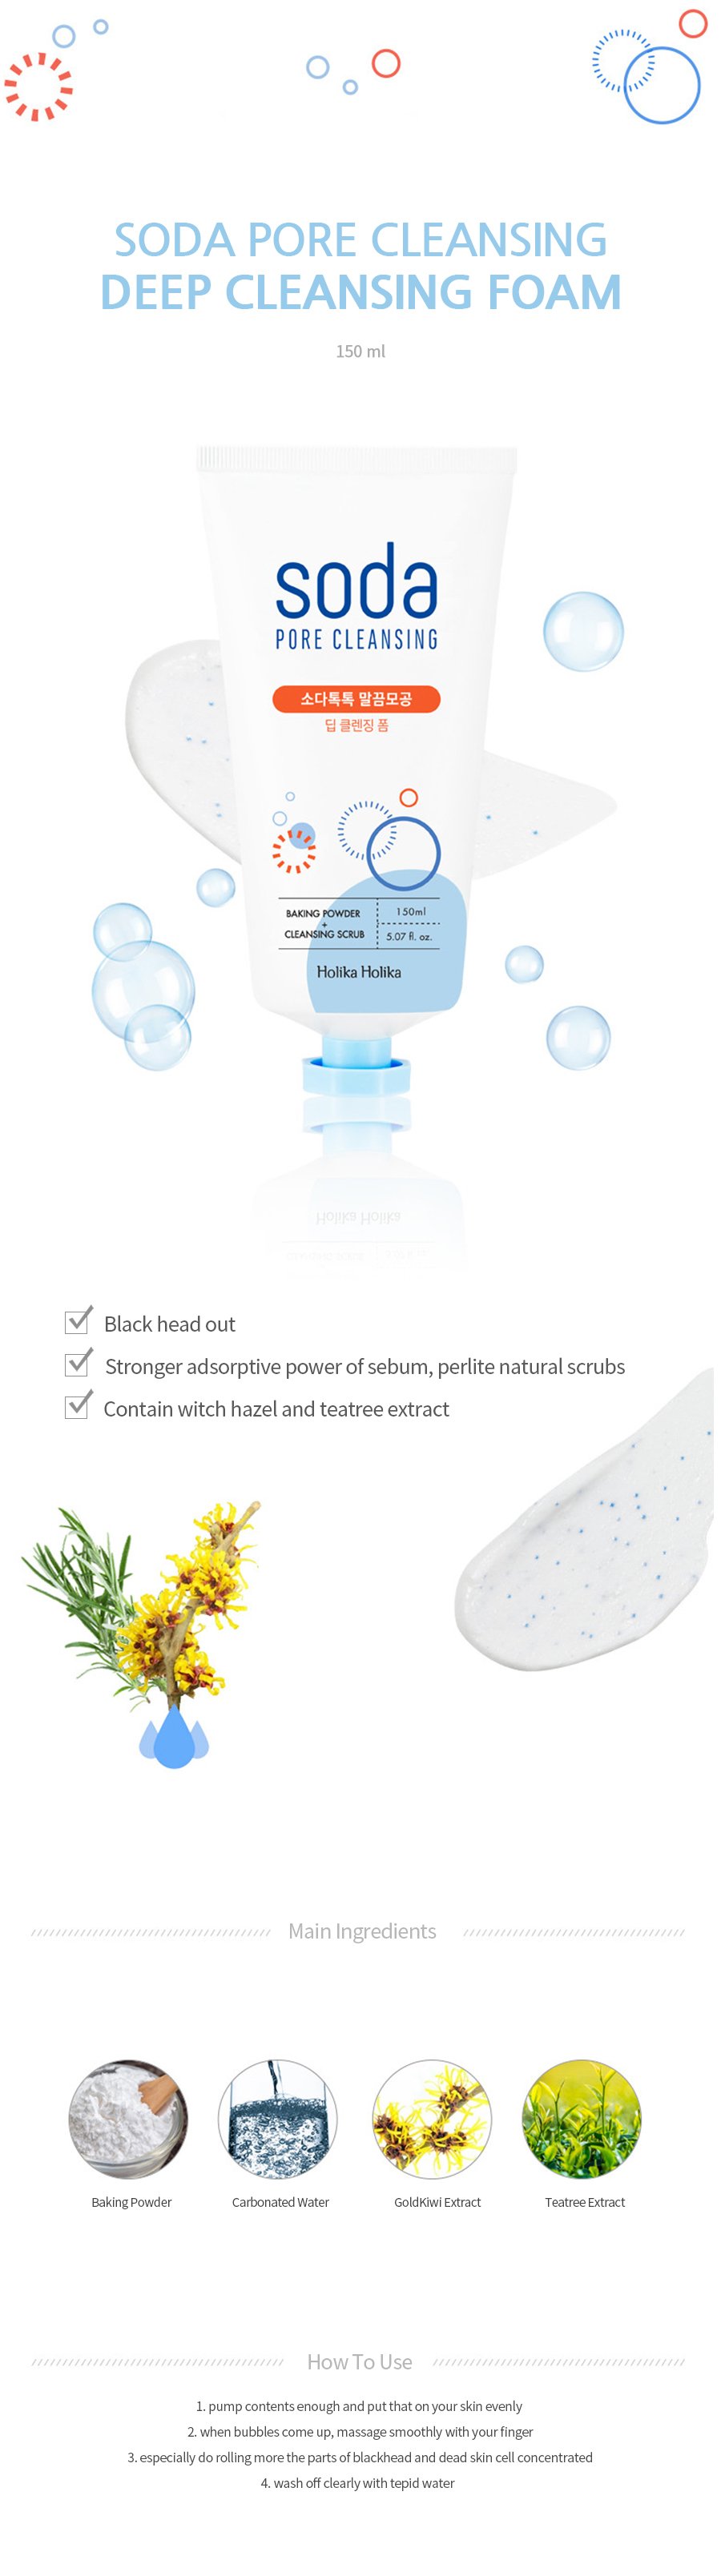 Soda Pore Cleansing Deep Cleansing Foam 150ml How to Use Description Ingredients